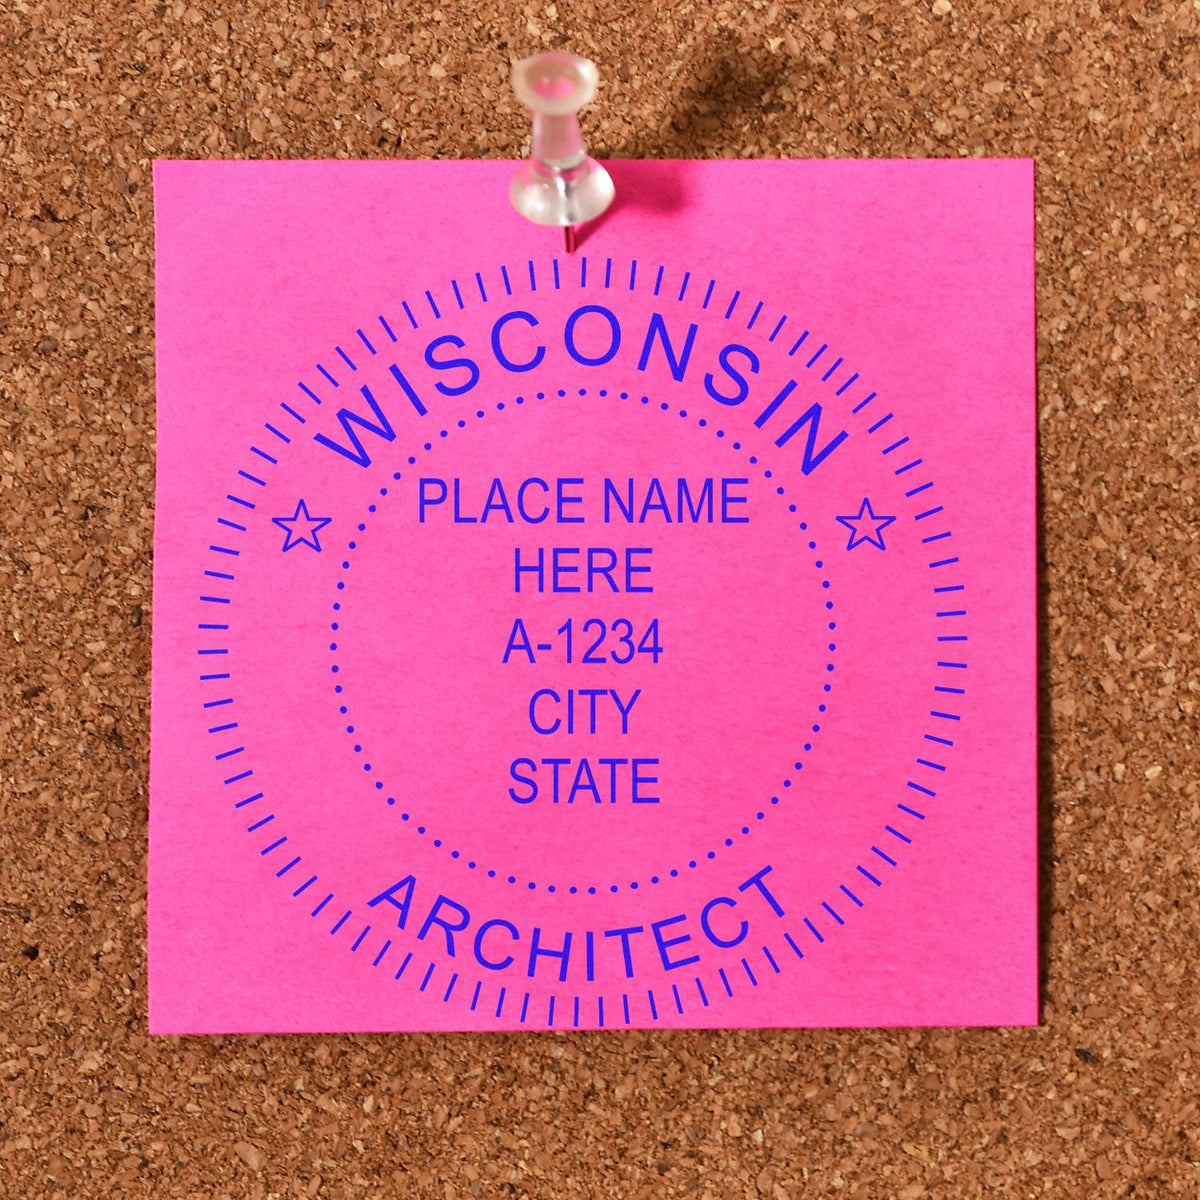 Wisconsin Architect Seal Stamp Lifestyle Photo